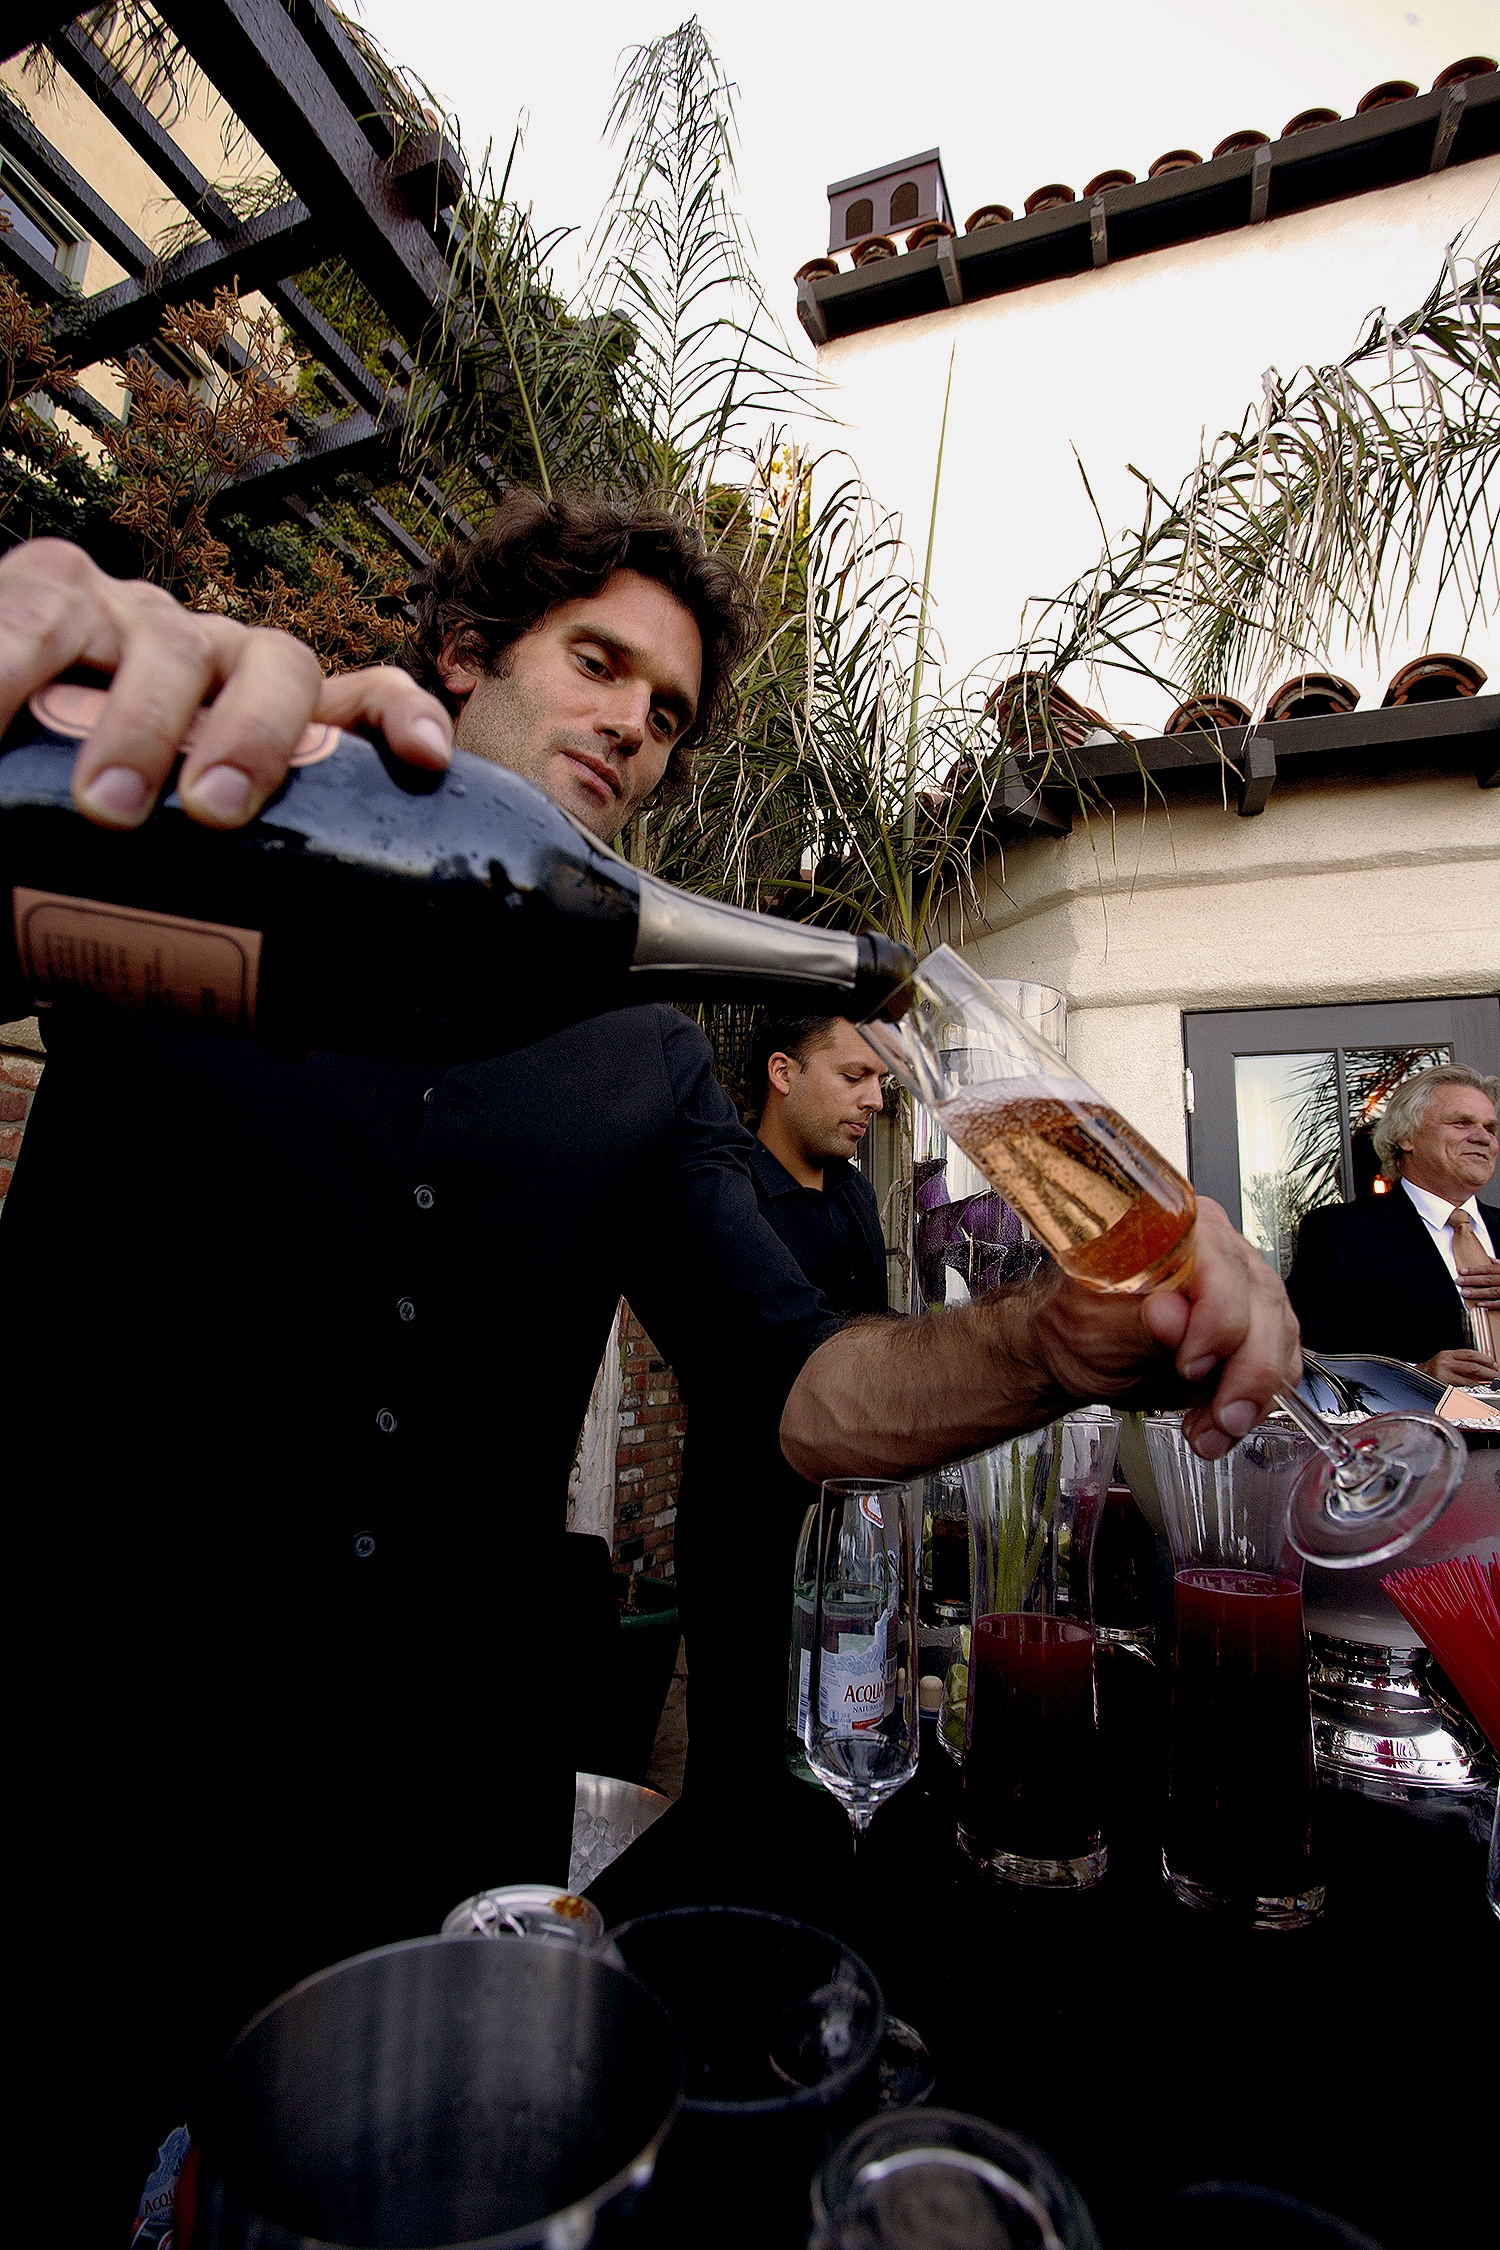 Bartender pouring champagne